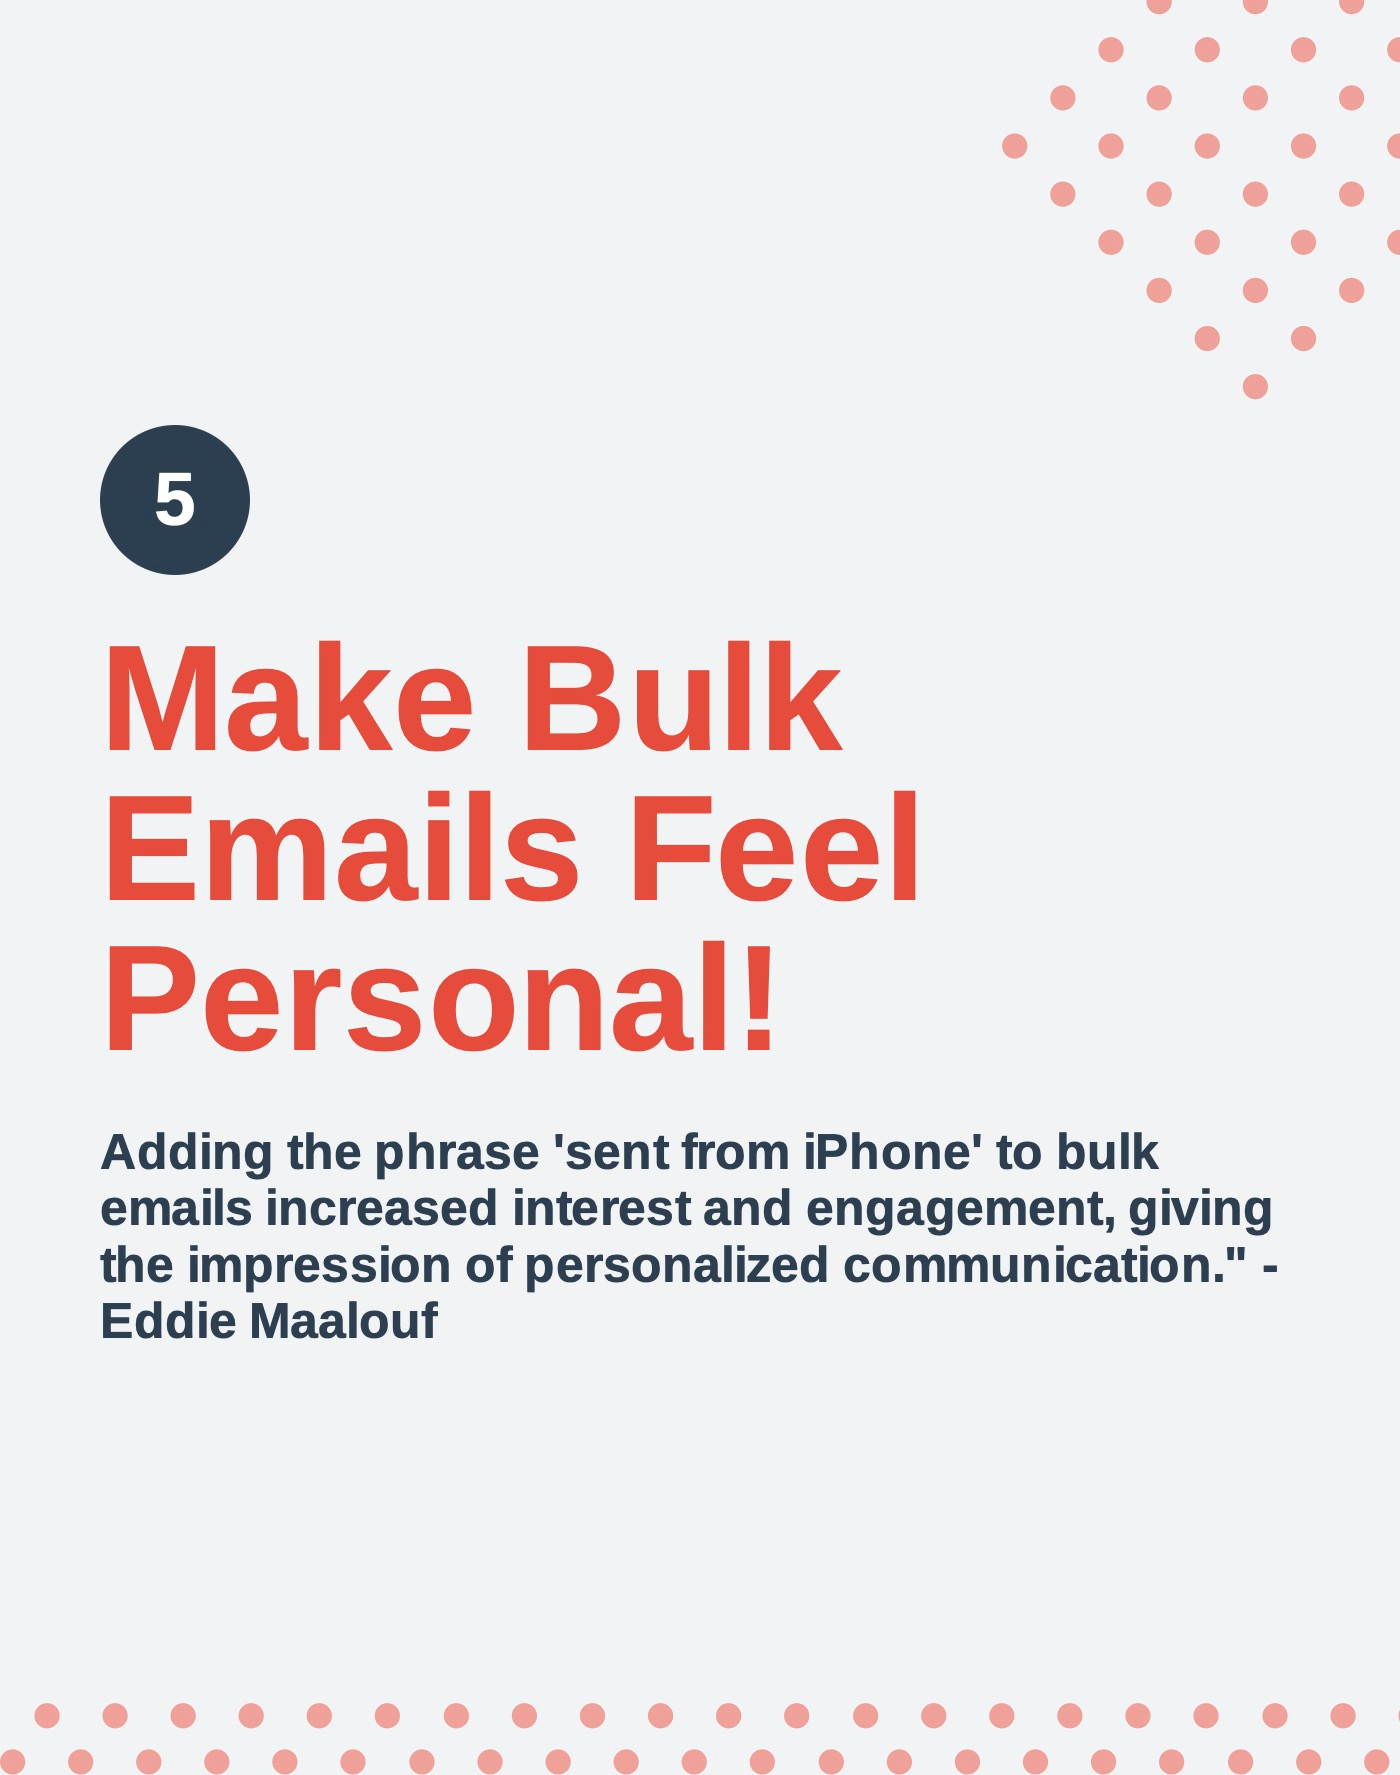 Personalise your emails - Eddie Mallouf